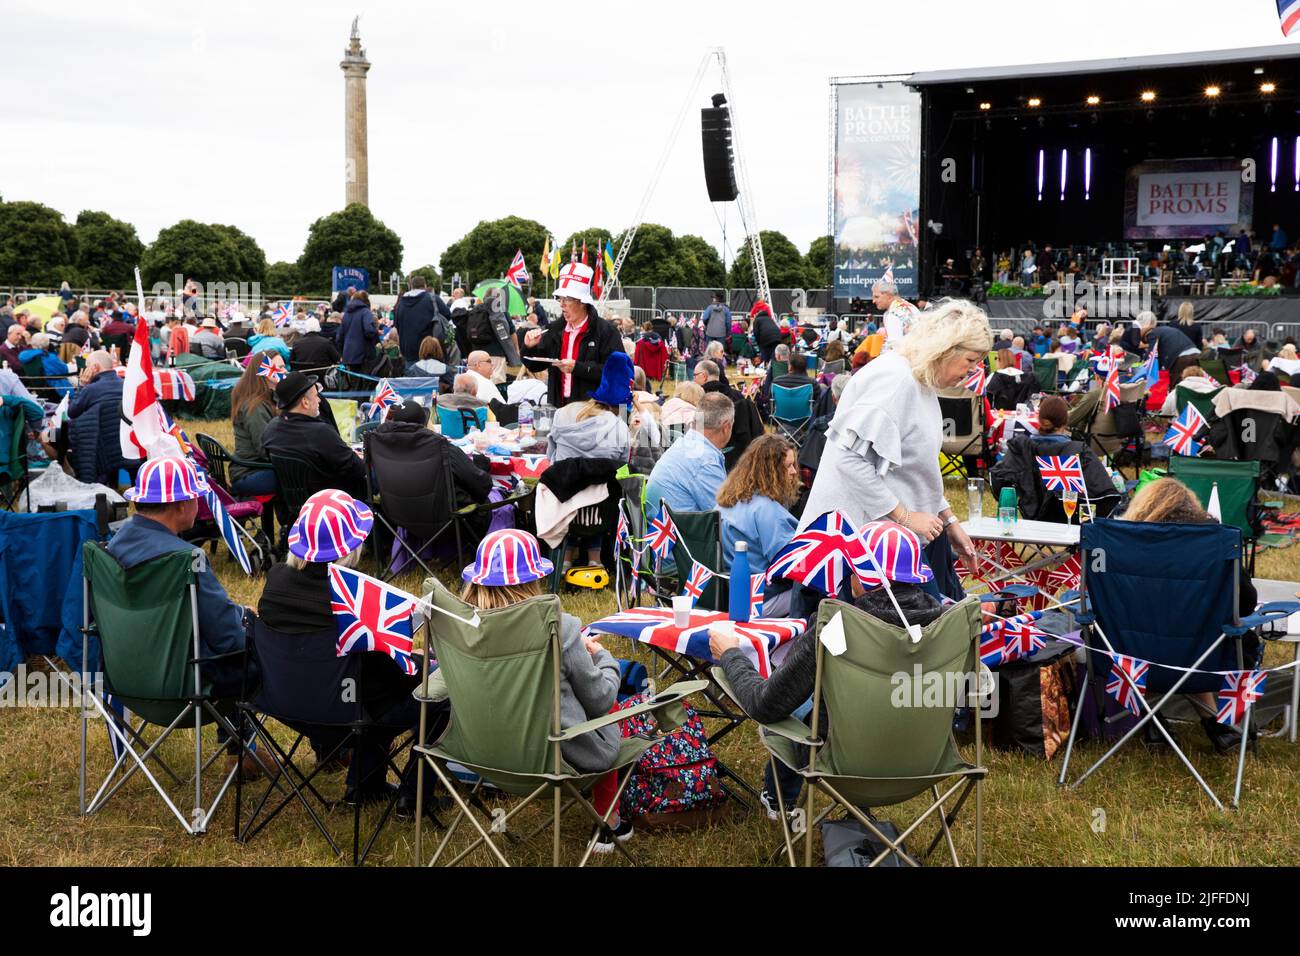 Woodstock, Oxfordshire, UK. 2nd July 2022. Audience seated in camping chairs with Untion Jack bowler hats. Battle Prom Picnic Concerts. Blenheim Palace. United Kingdom. Credit: Alexander Caminada/Alamy Live News Stock Photo